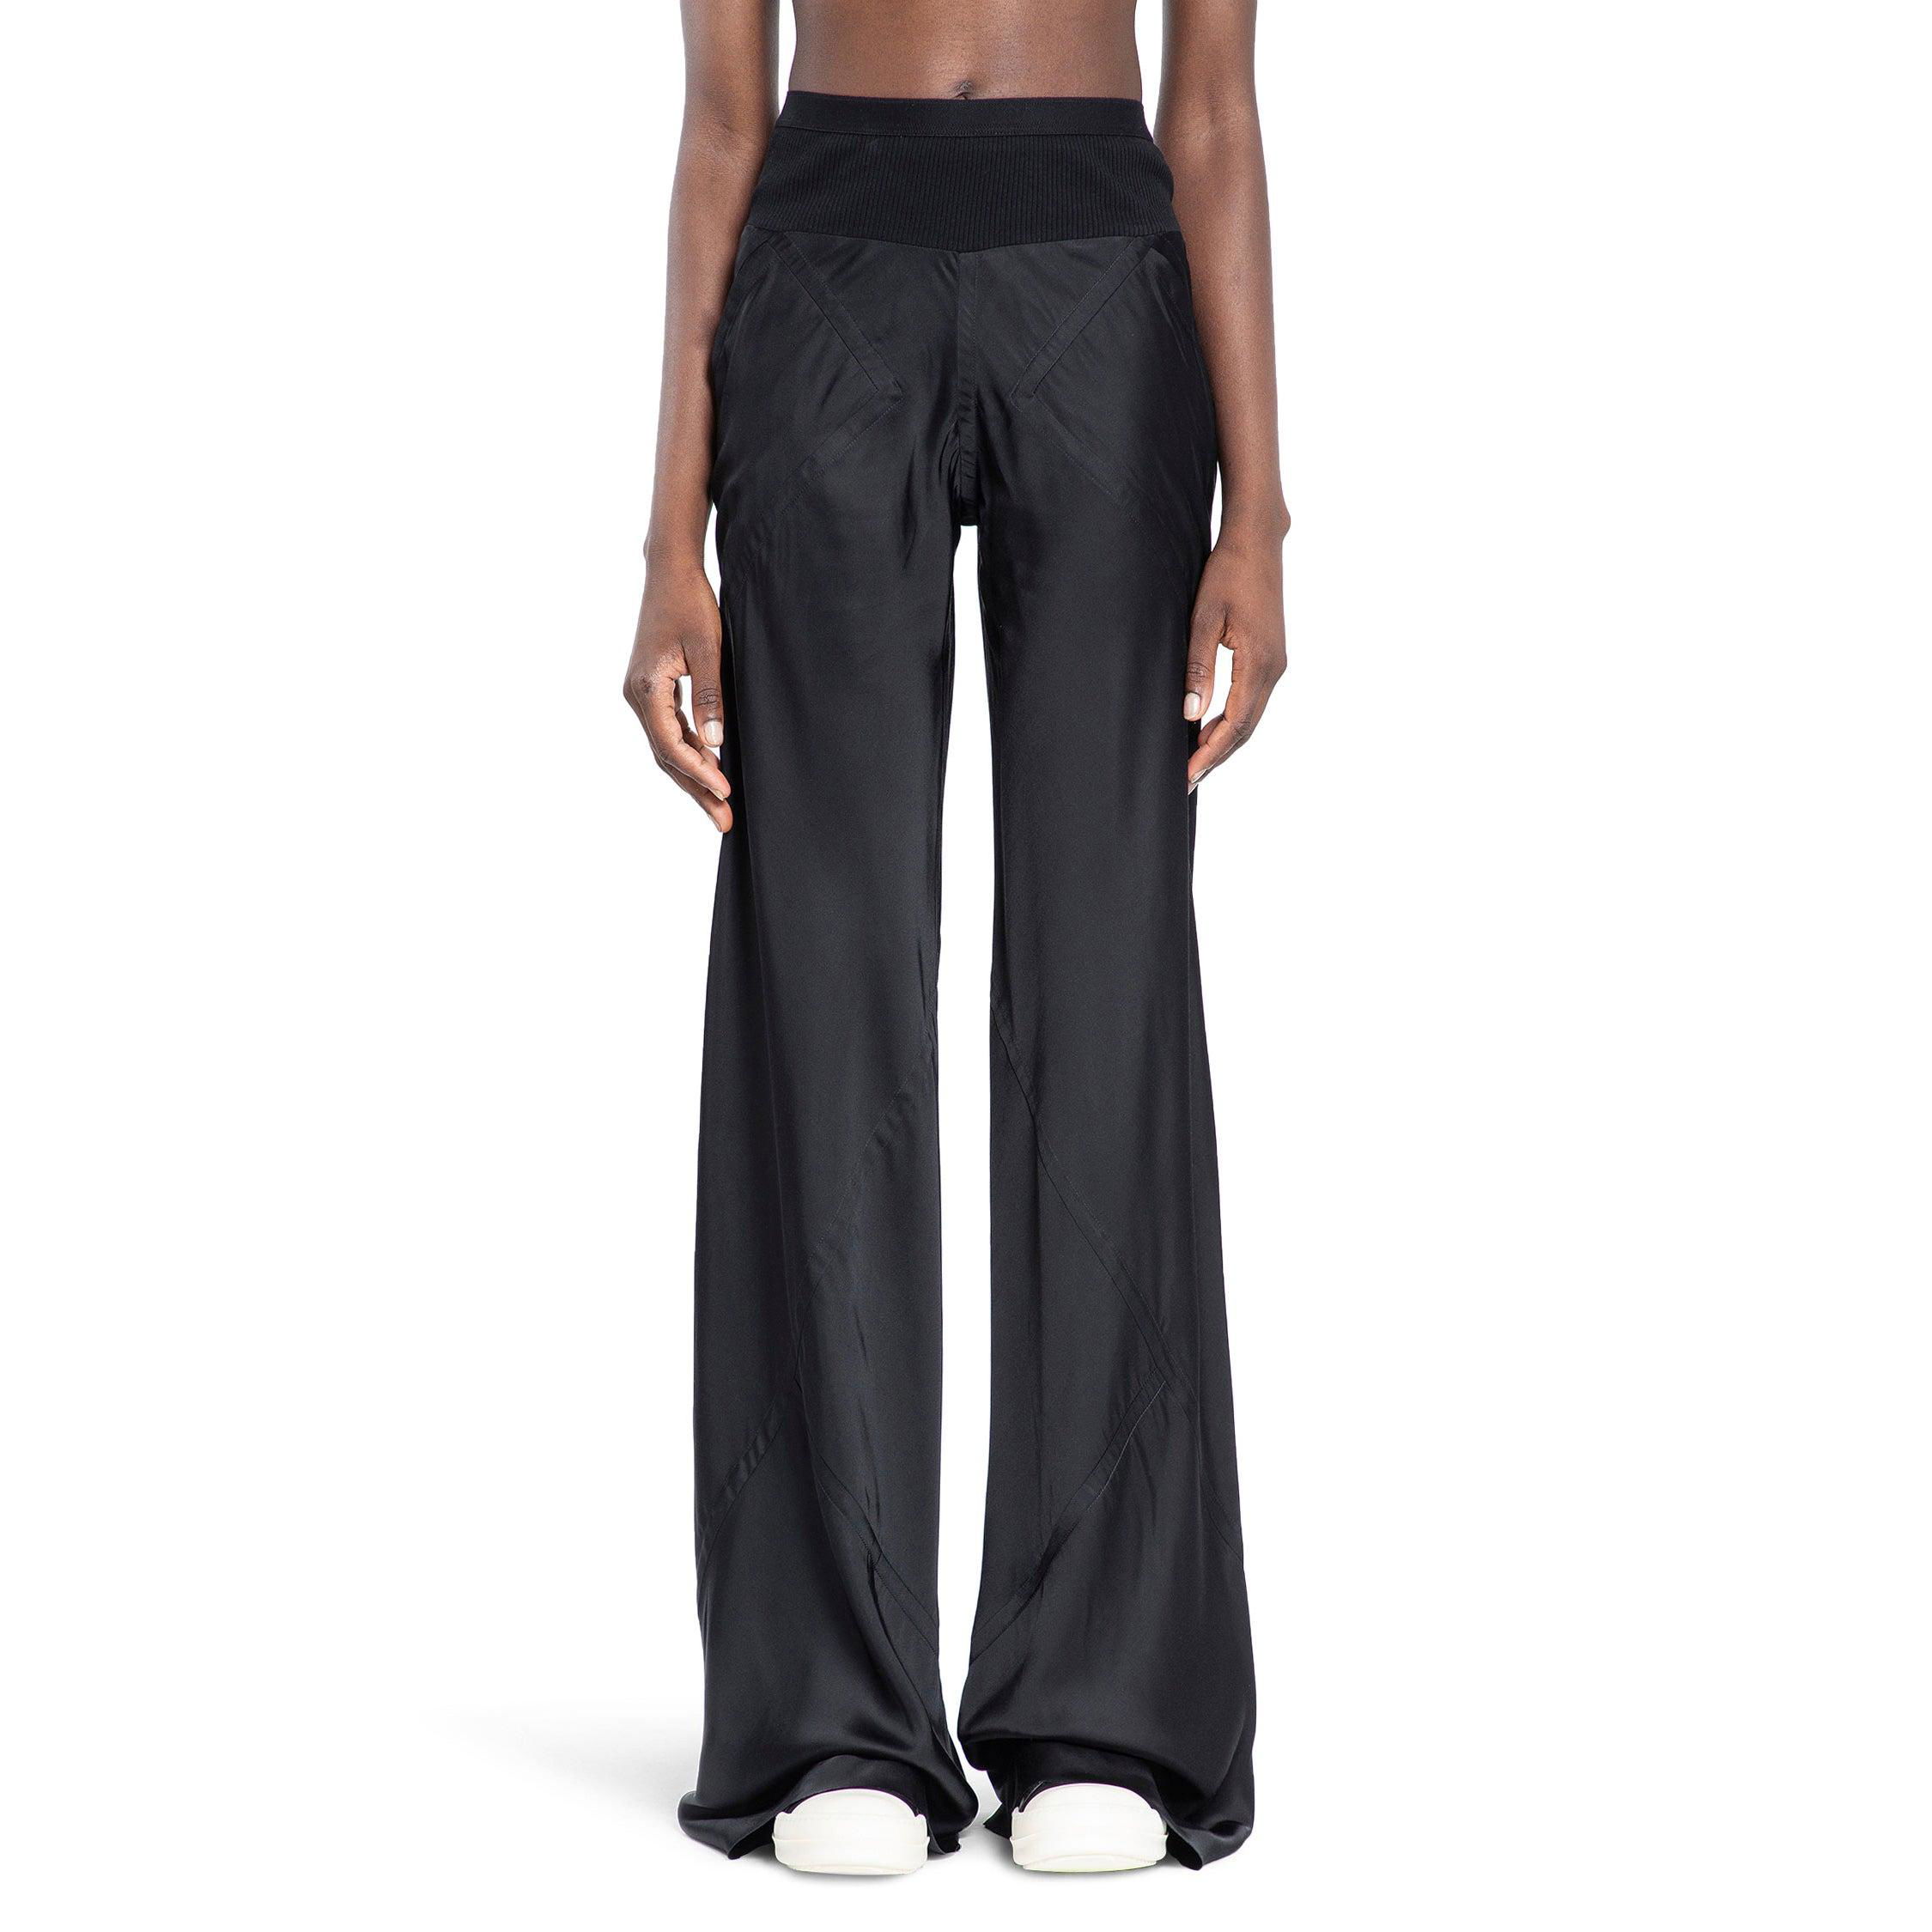 RICK OWENS WOMAN BLACK TROUSERS by RICK OWENS